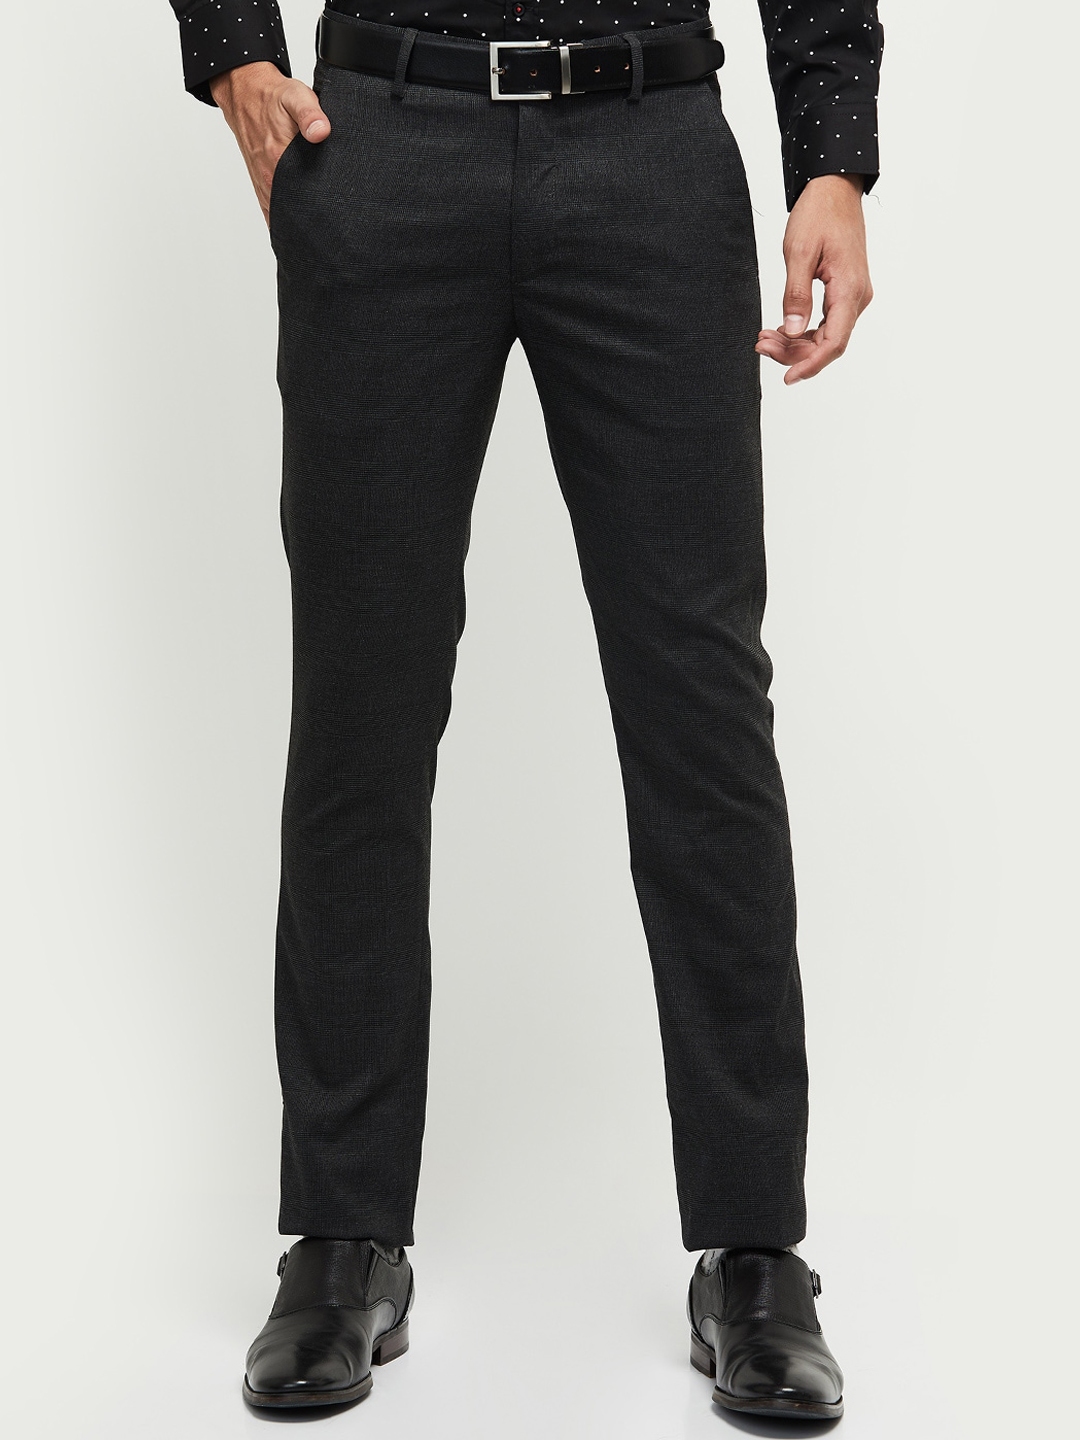 Buy Max Men Charcoal Trousers - Trousers for Men 17891382 | Myntra